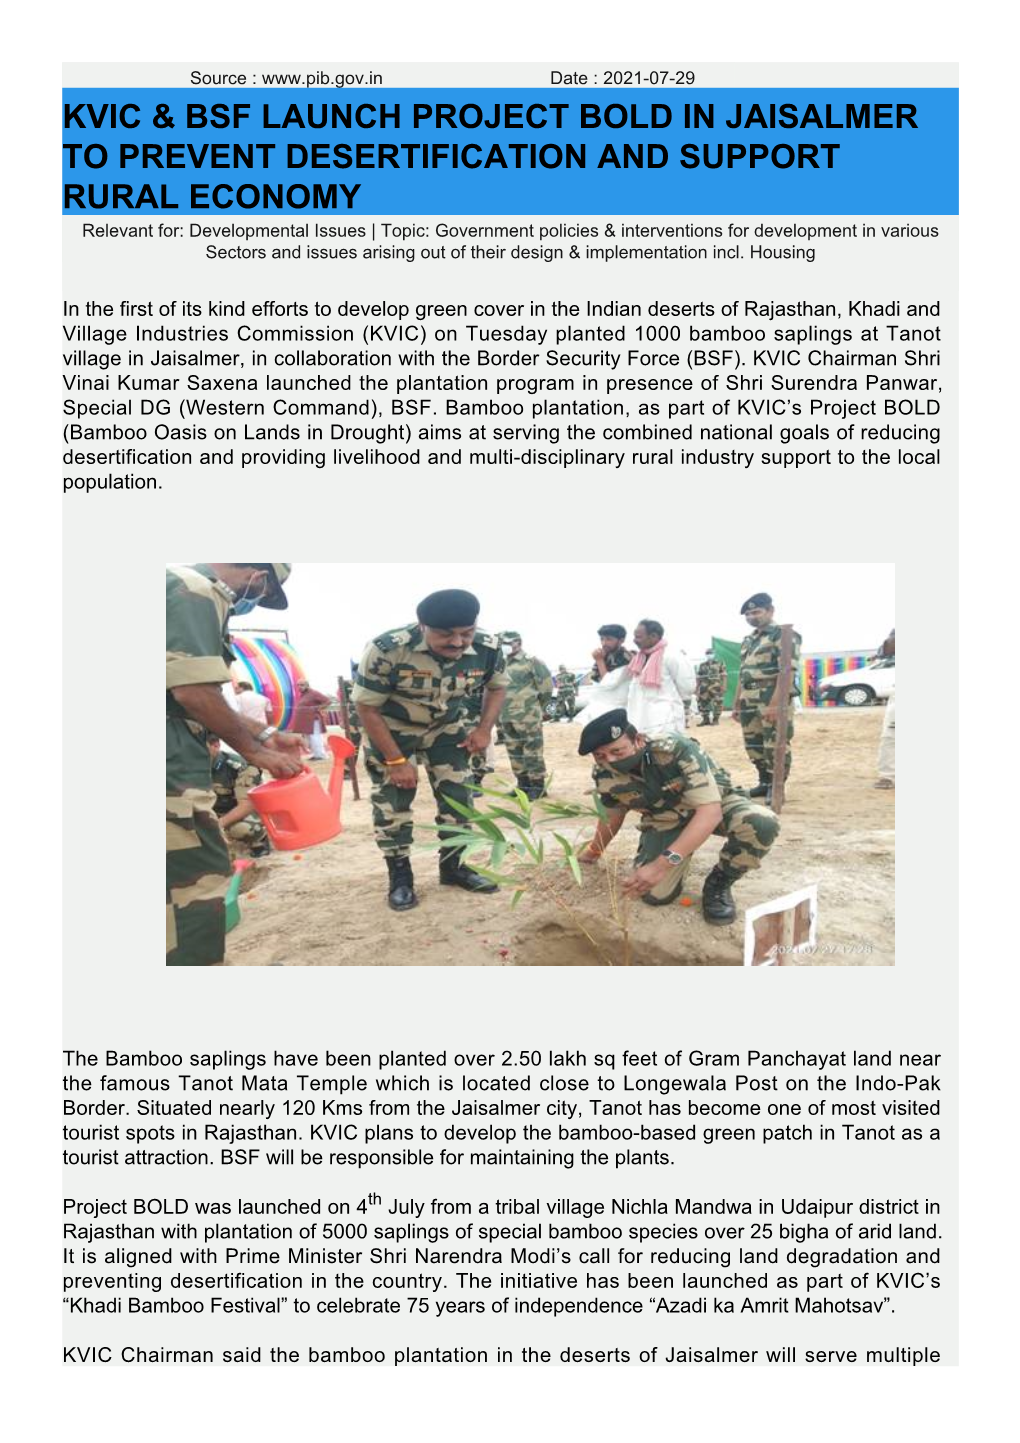 KVIC & BSF Launch Project BOLD in Jaisalmer to Prevent